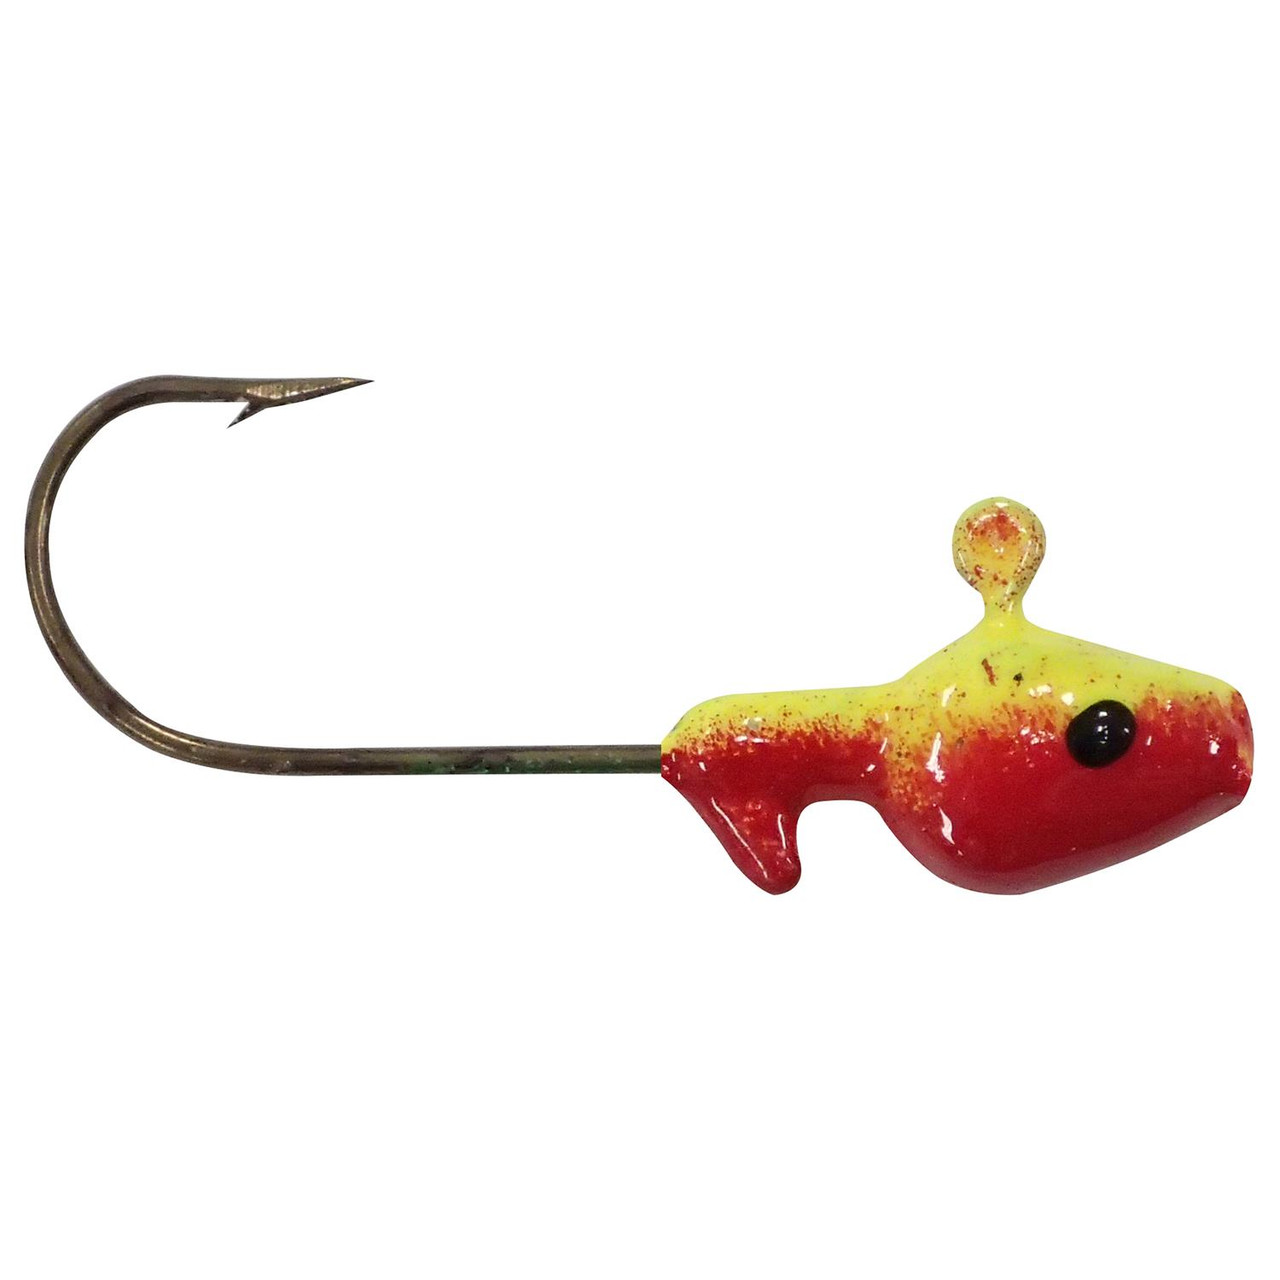 Southern Pro Jig Head Minnow Head Painted - Red/Chartreuse